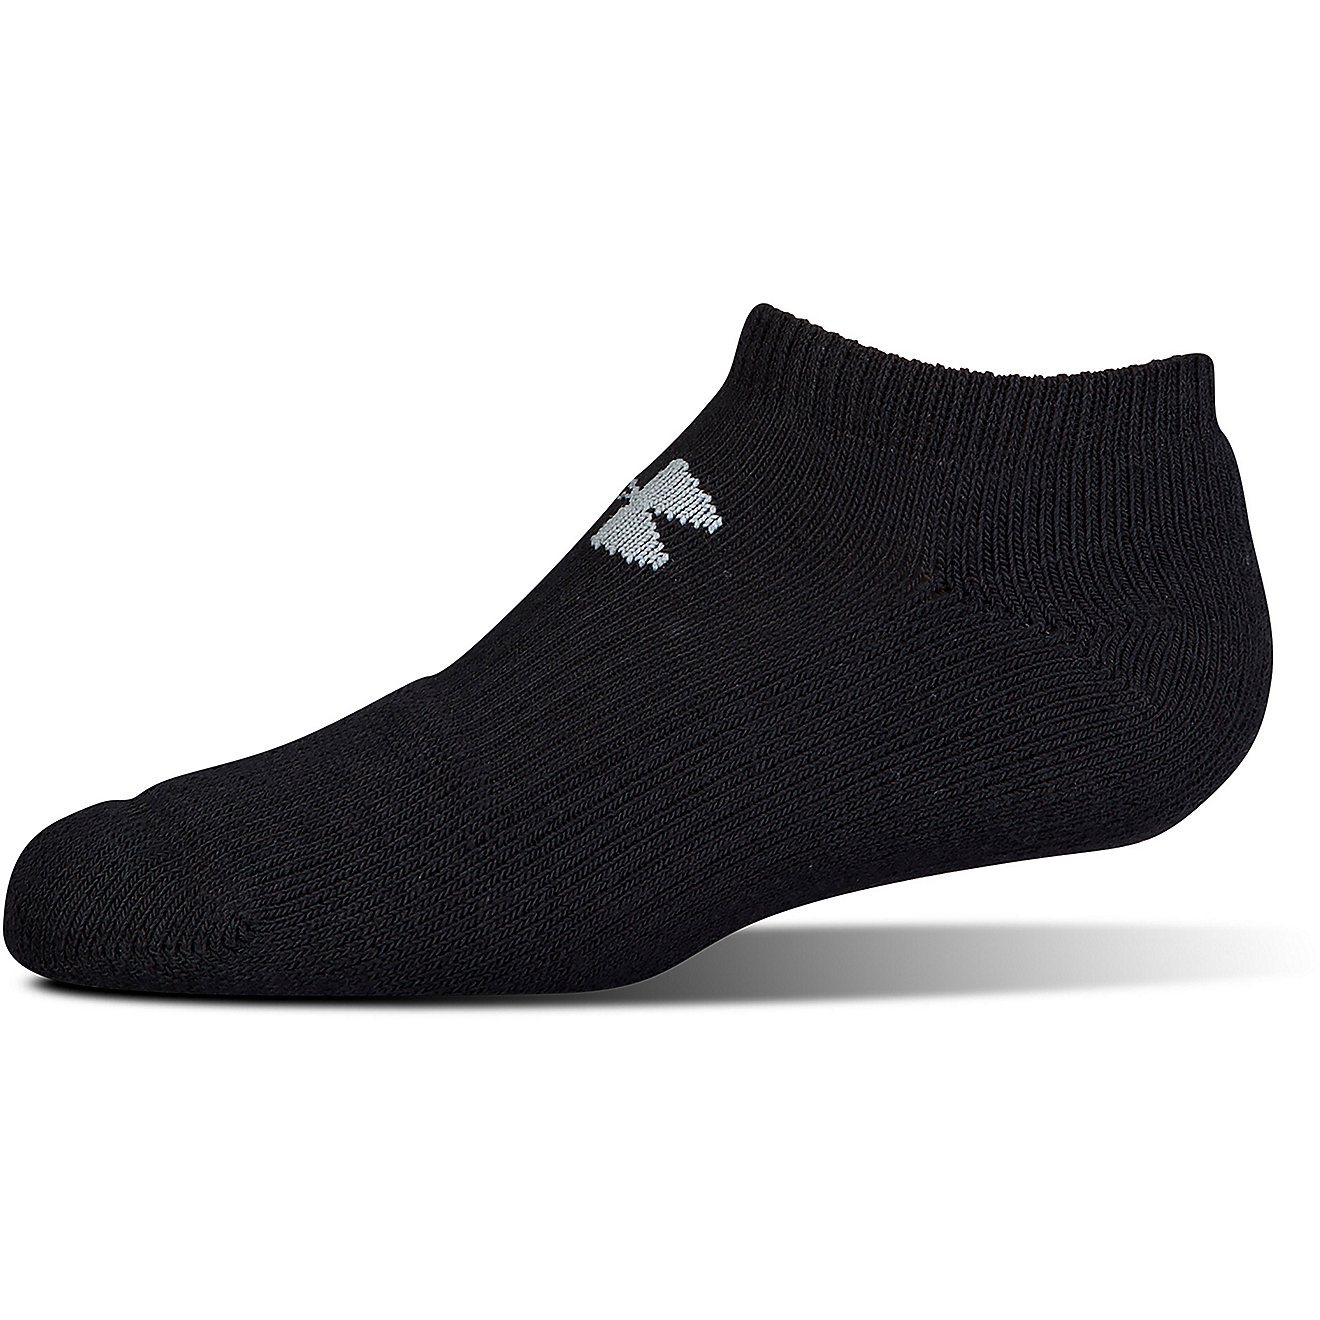 Under Armour Adults' Charged Cotton No-Show Socks 6 Pack                                                                         - view number 2